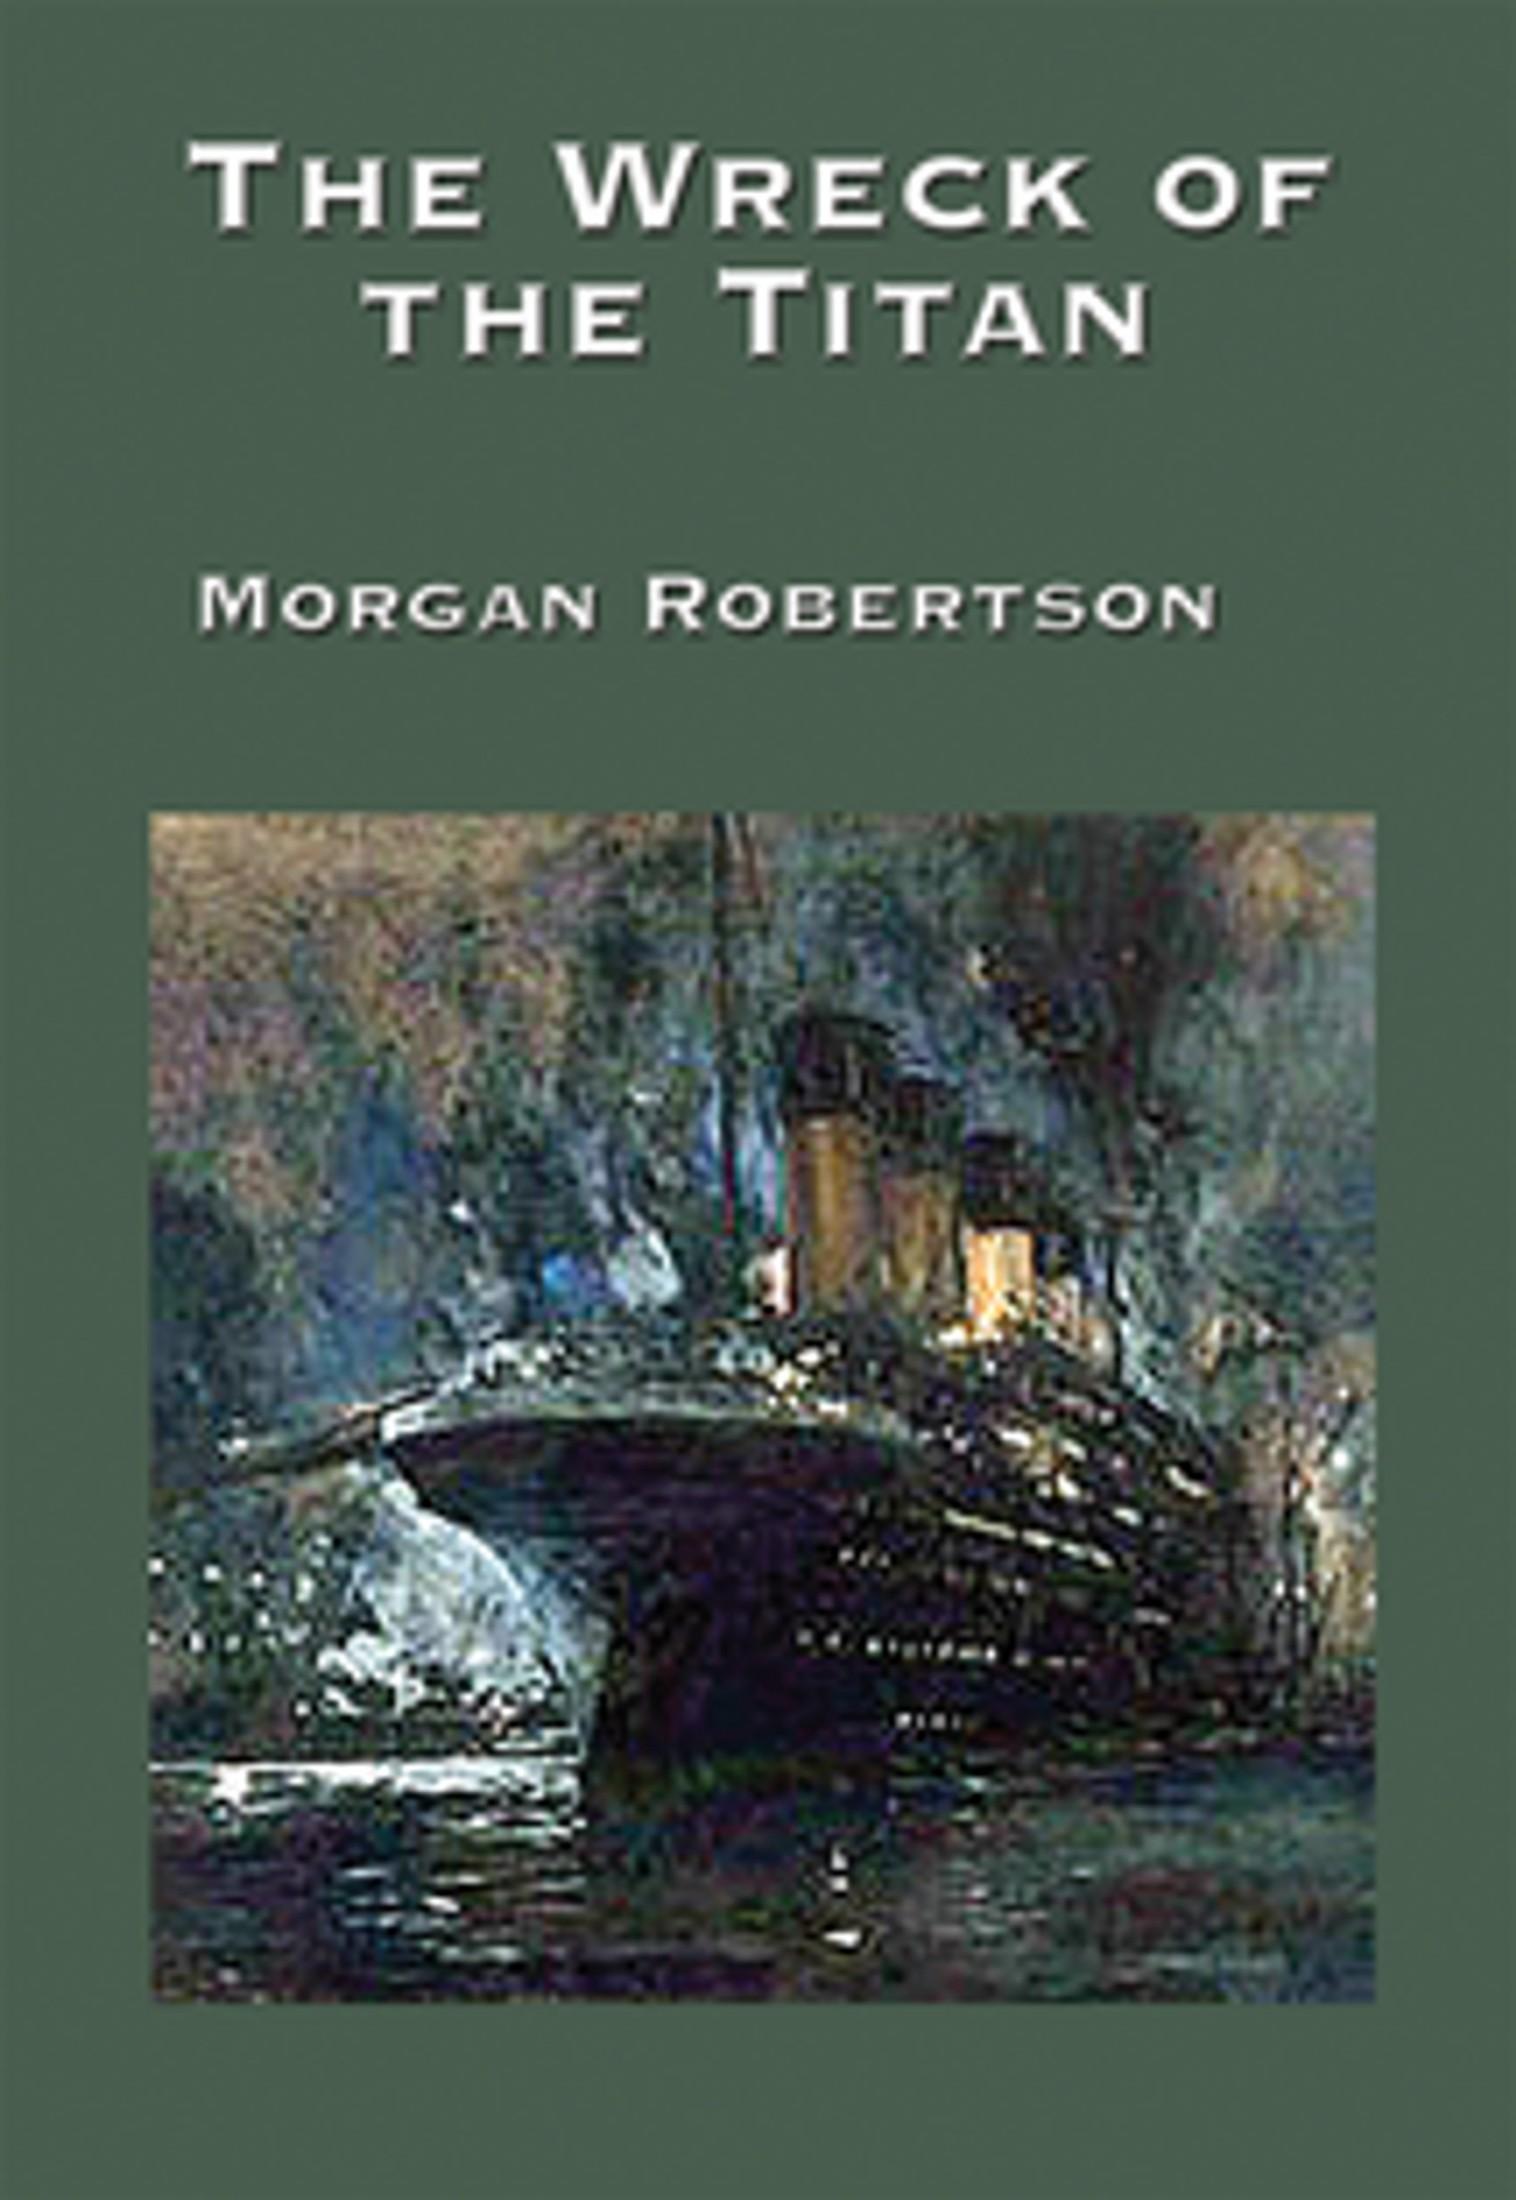 The Wreck of the Titan (1898) by Morgan Robertson